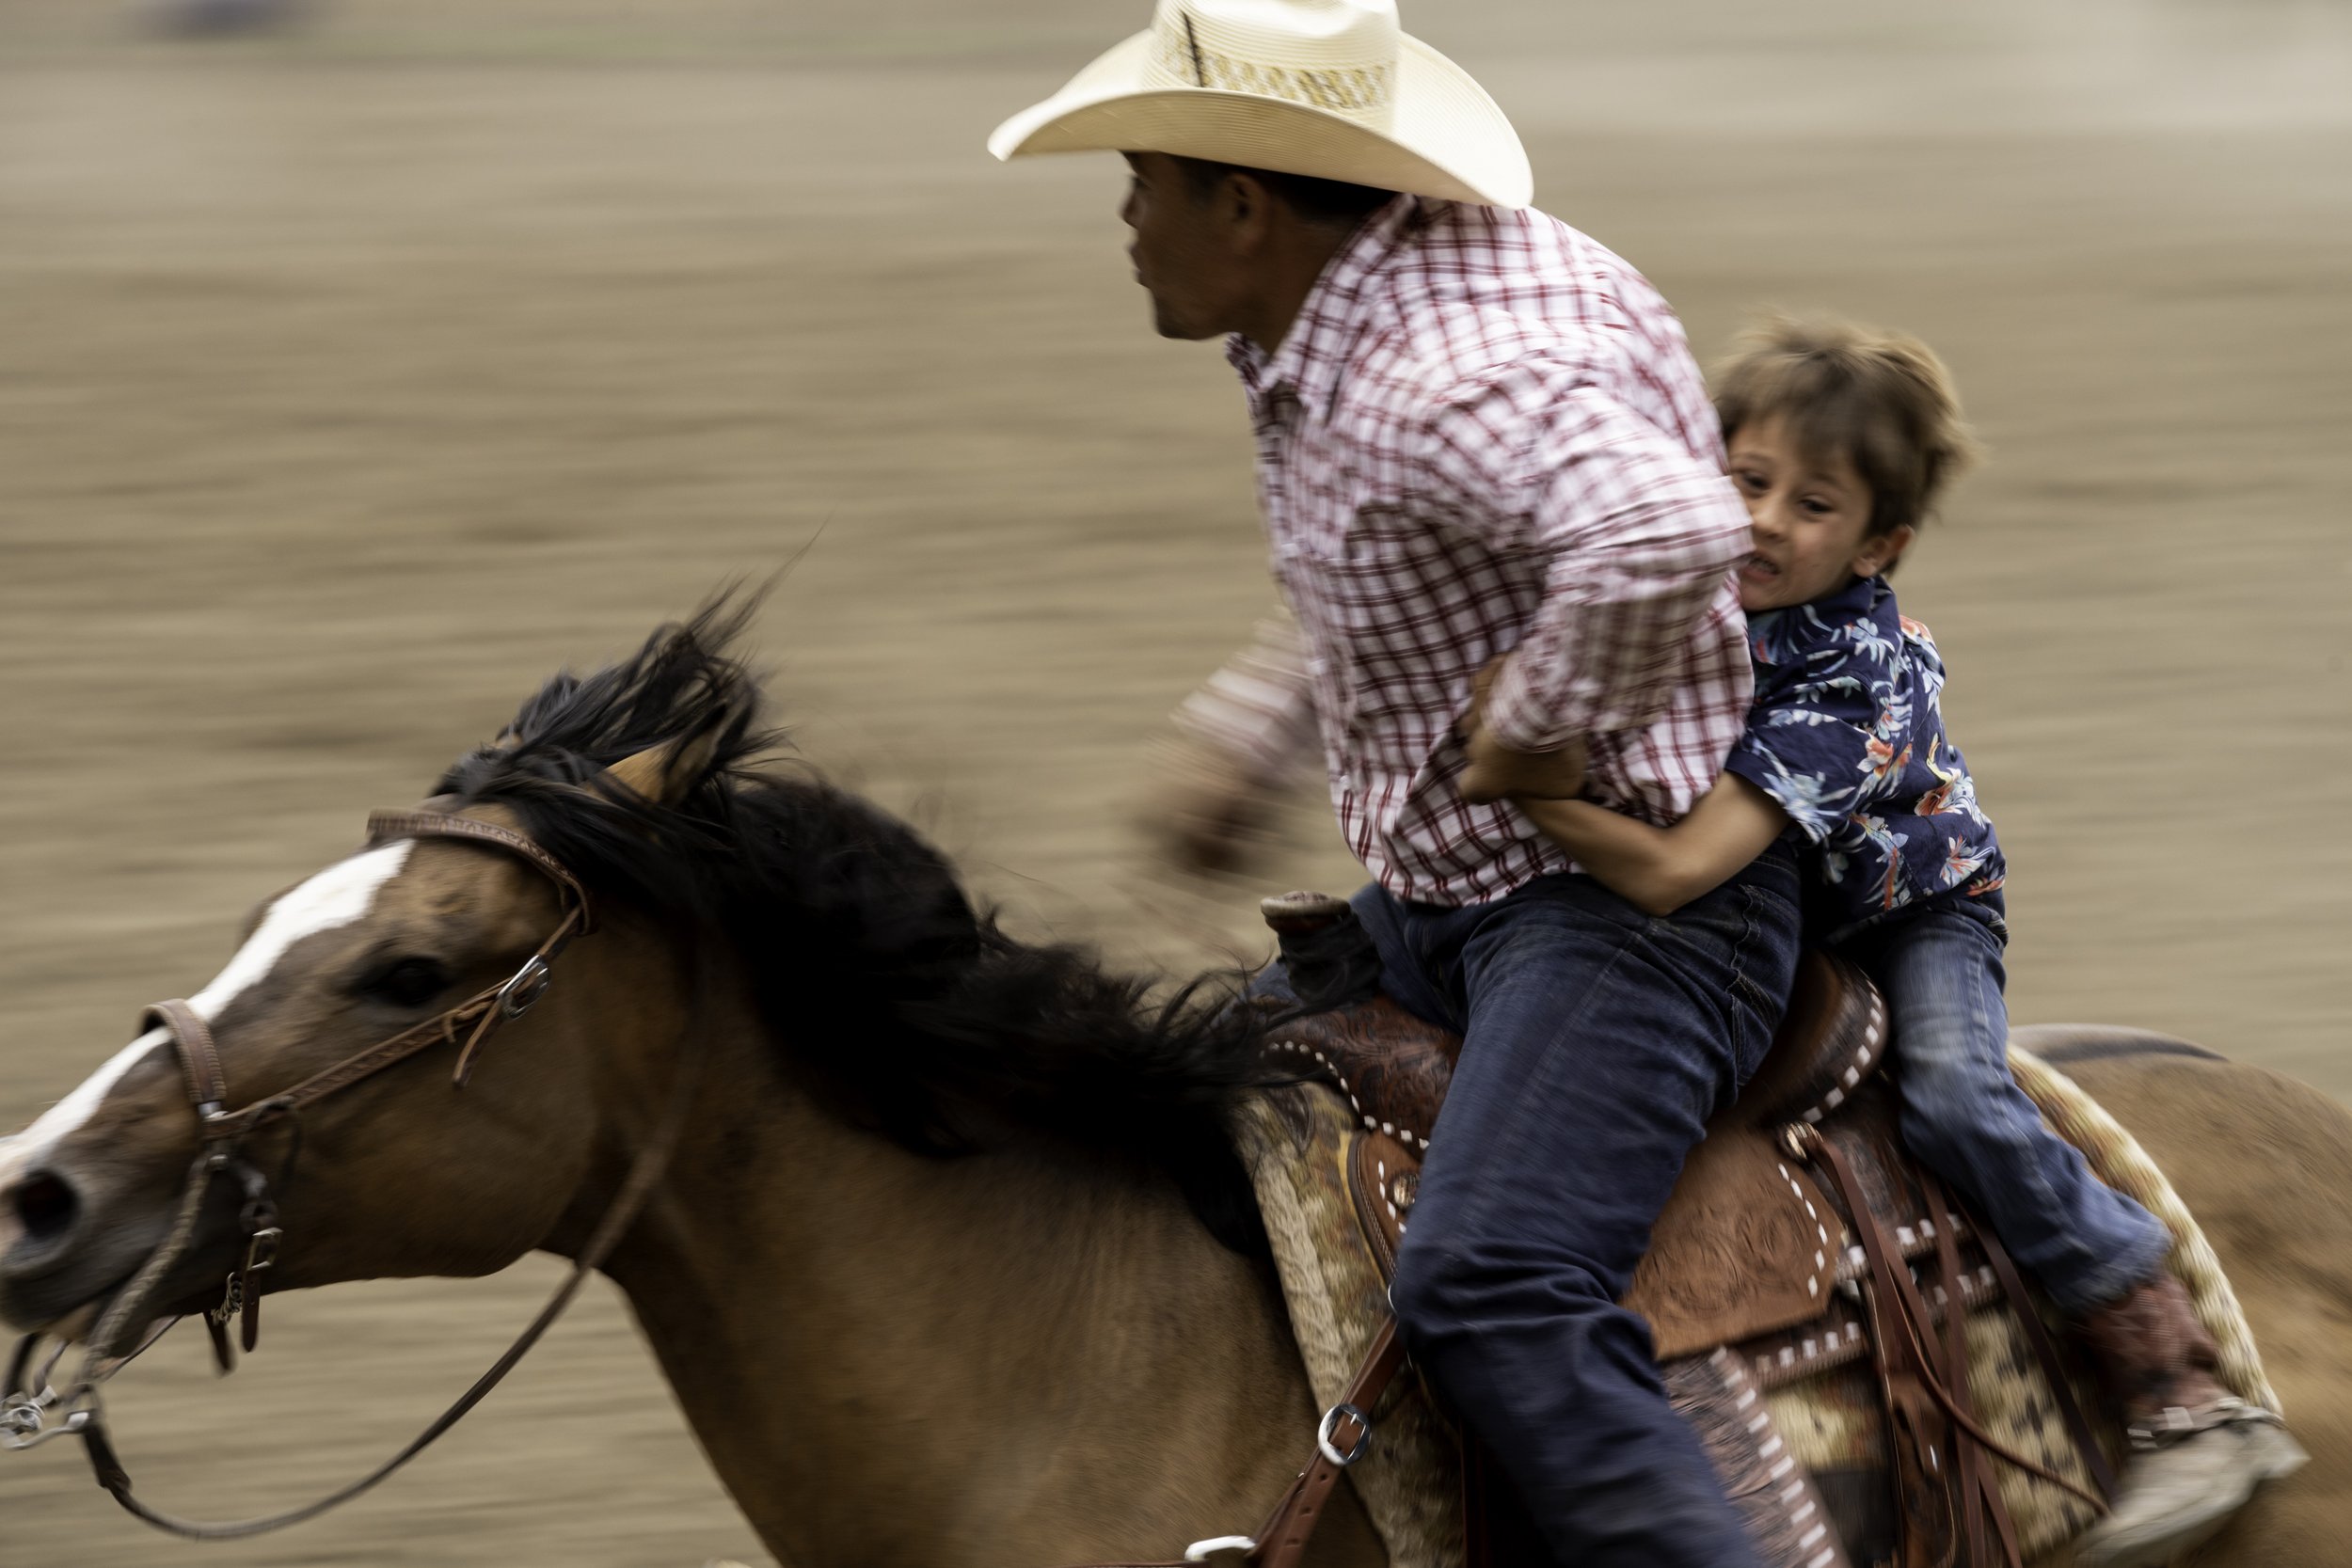  A boy holds on tight during the rescue race at the 99th Maverick Club Rodeo at The Maverick Club Rodeo Grounds in Cimarron, N.M. on July 4, 2022. The annual event is the longest running open rodeo in the Western United States beginning in 1923.  